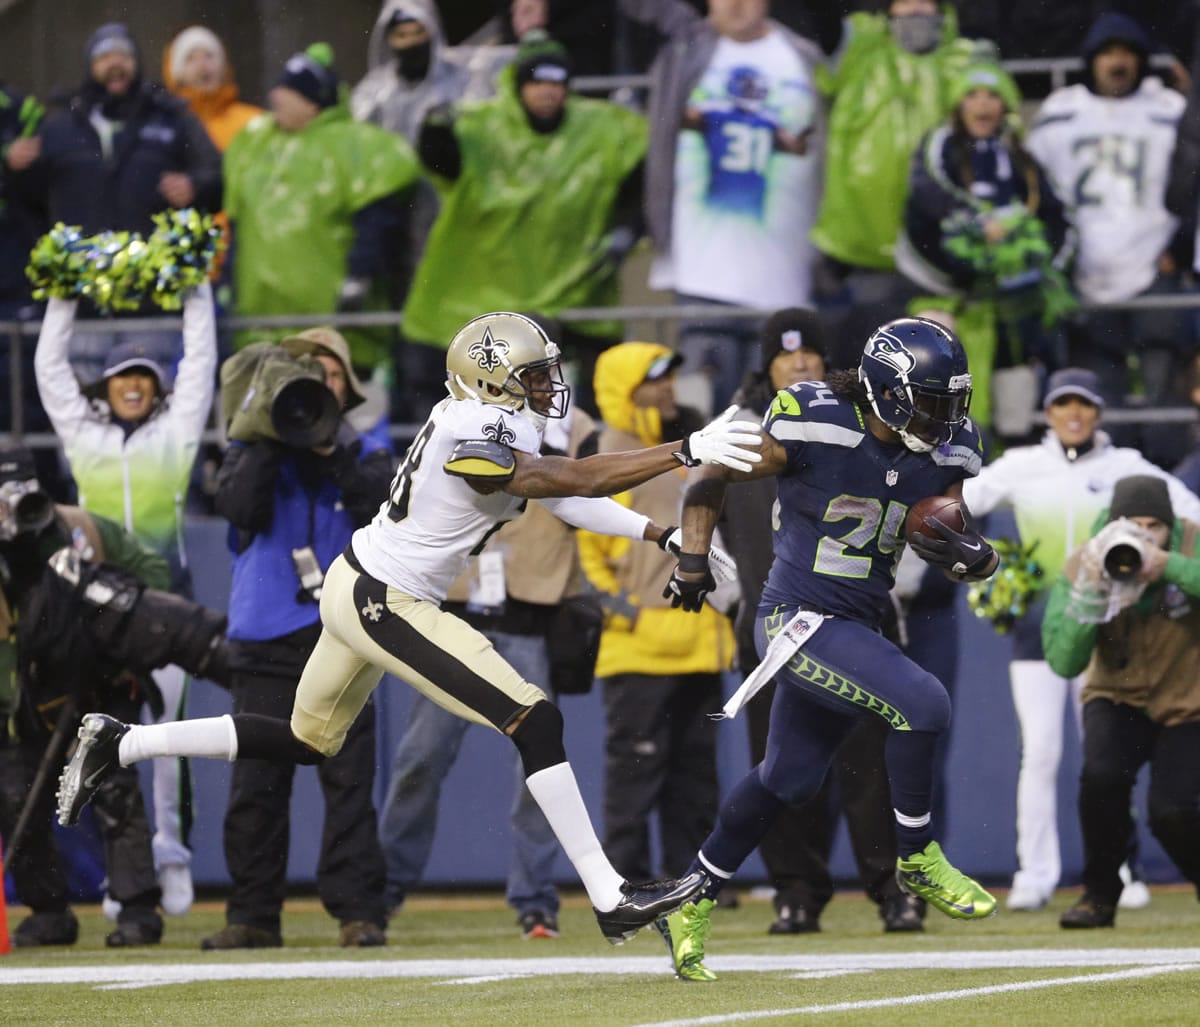 Seattle Seahawks running back Marshawn Lynch (24) runs past New Orleans Saints cornerback Keenan Lewis (28) to score on a 31-yard touchdown during the fourth quarter Saturday. (AP Photo/Ted S.